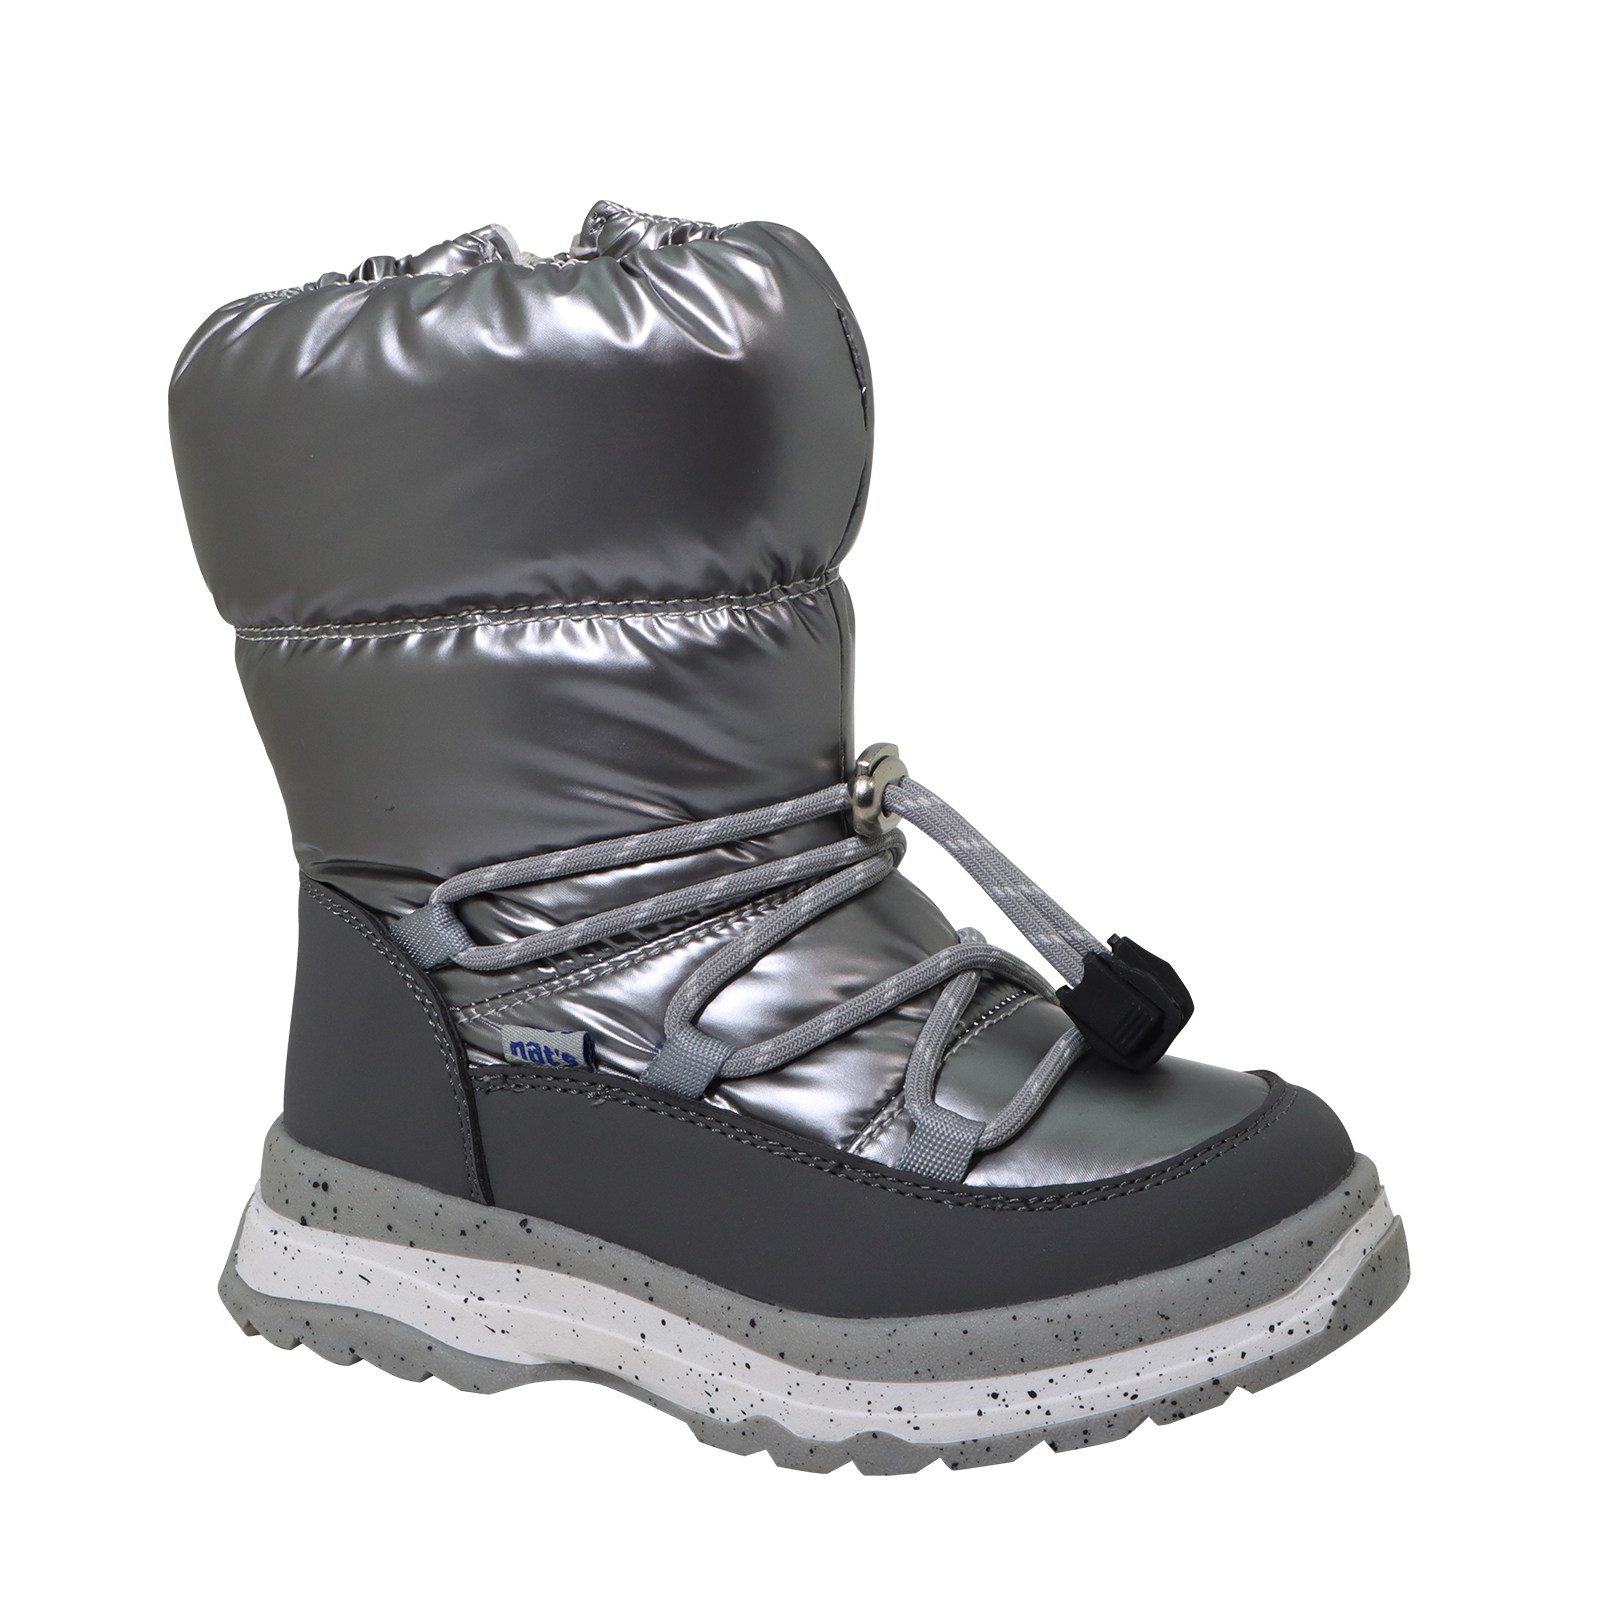 High quality boy's waterproof boot manufacturer direct supply